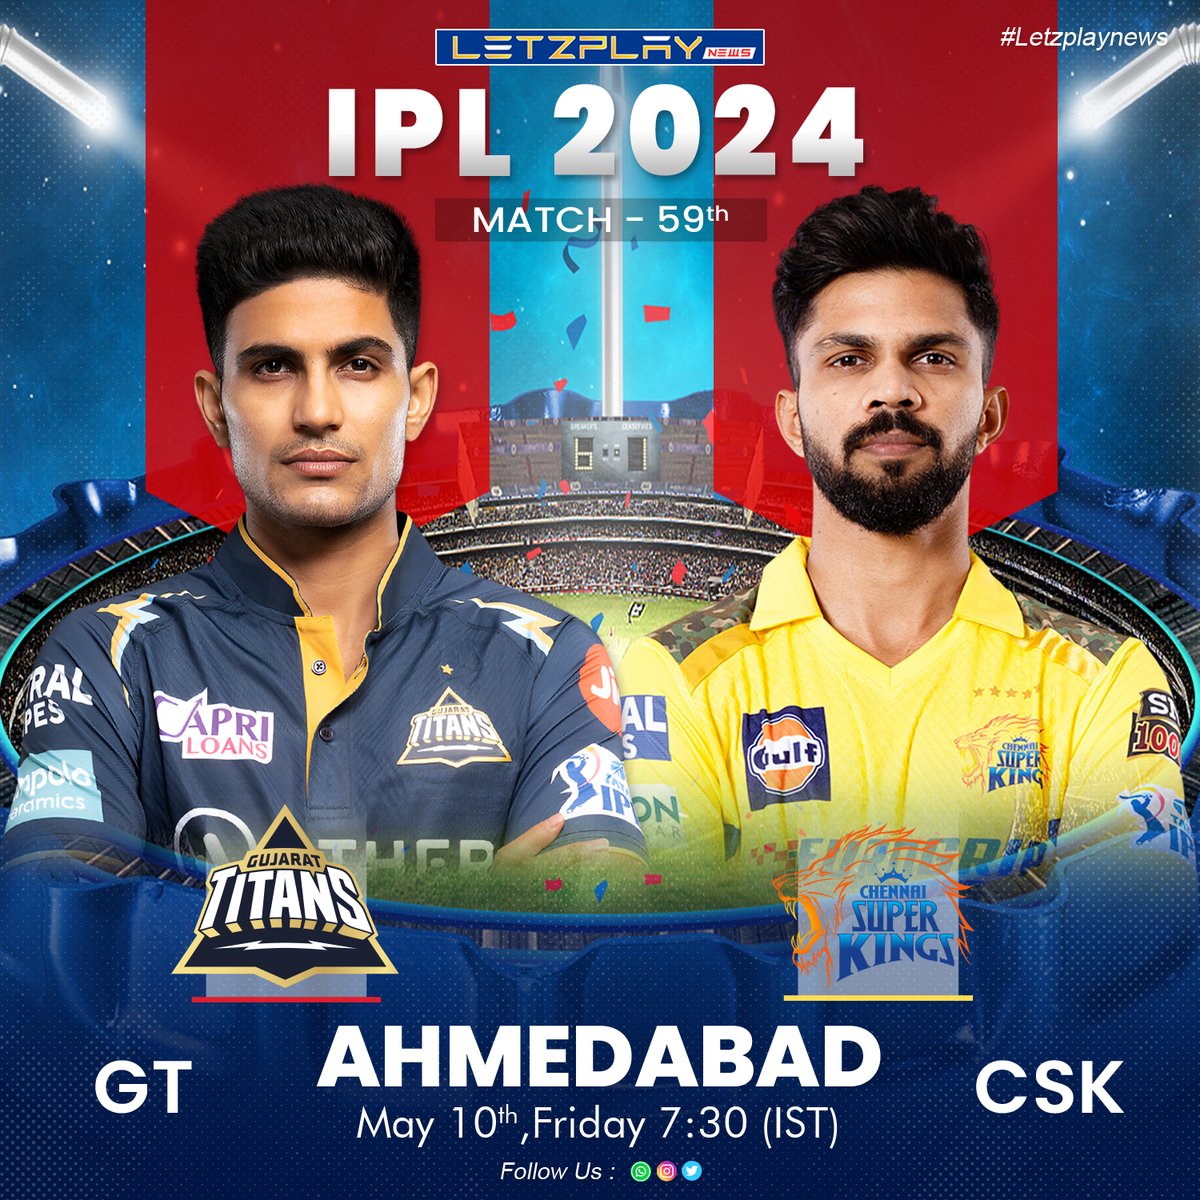 🏏 Get ready for an epic showdown in Ahmedabad as Gujarat Titans take on Chennai Super Kings in IPL 2024! 🌟 

Action kicks off at 7:30 PM IST! Don't miss the excitement! 🔥 
.
.
.
.
#GTvsCSK #IPL2024 #iplupdate #sports #news #cricketer #livematch #CricketFever #AhmedabadClash